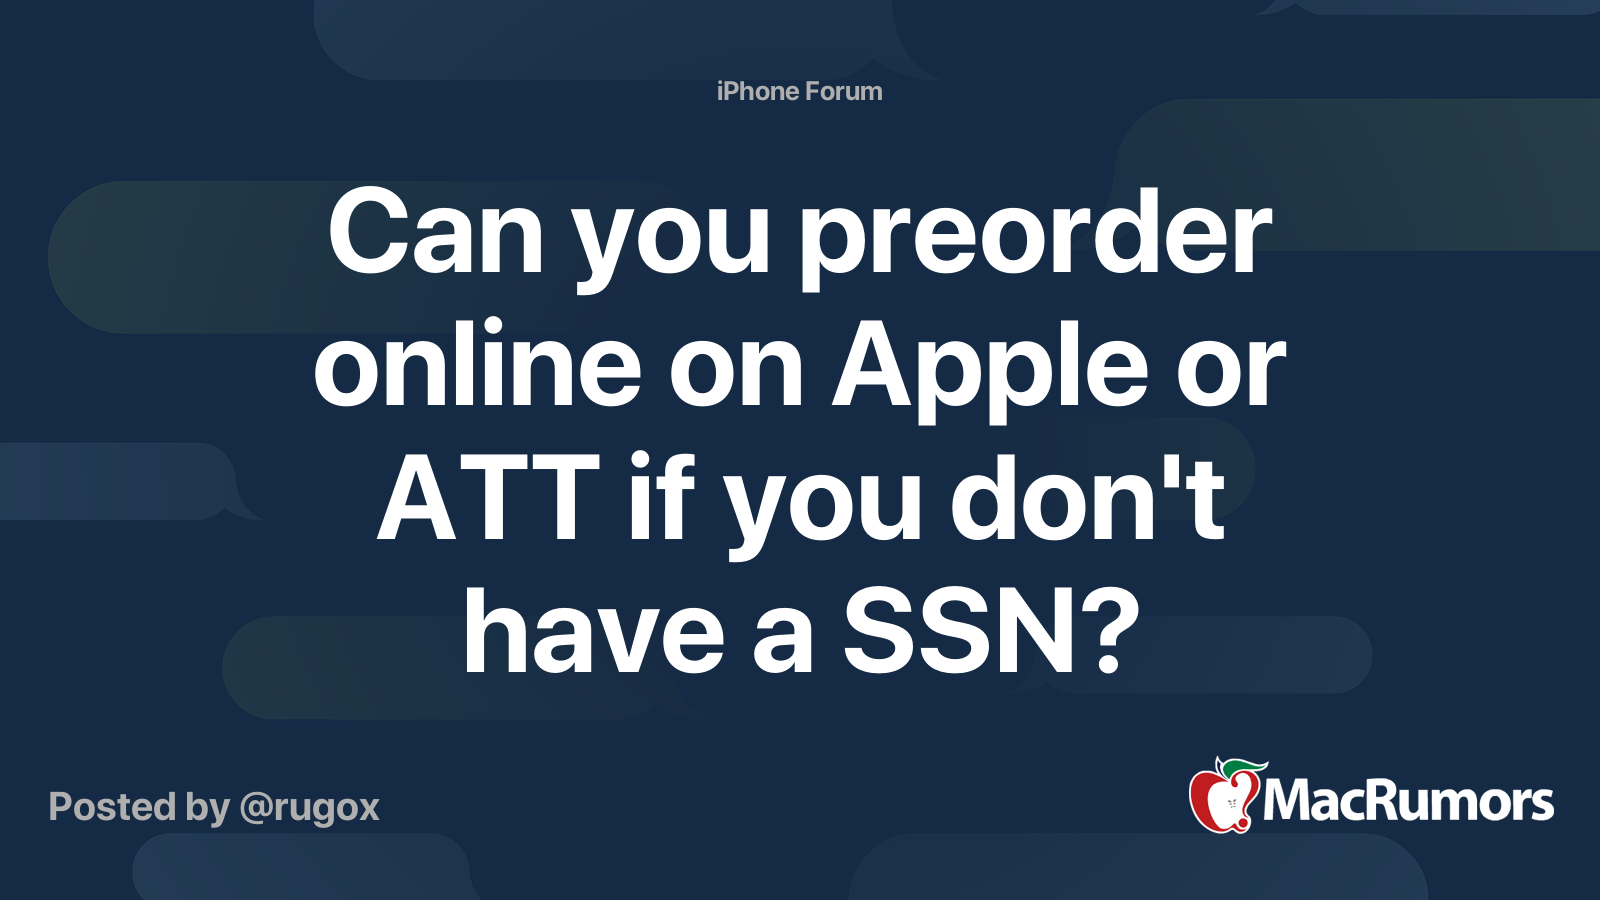 can-you-preorder-online-on-apple-or-att-if-you-don-t-have-a-ssn